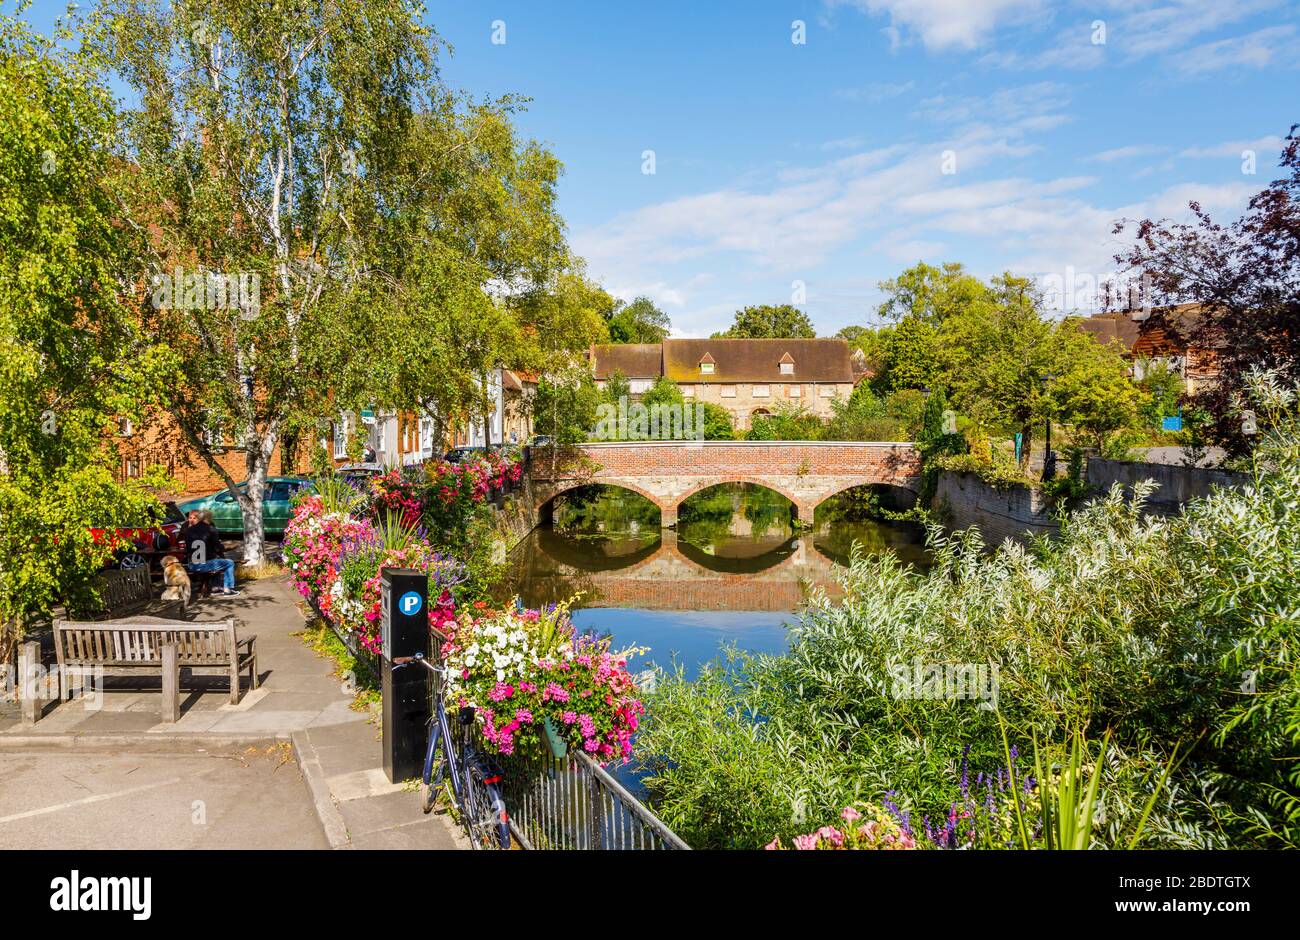 Arches of an extension of Abingdon Bridge over the River Thames in Abingdon-on-Thames, Oxfordshire, south-east England, UK Stock Photo